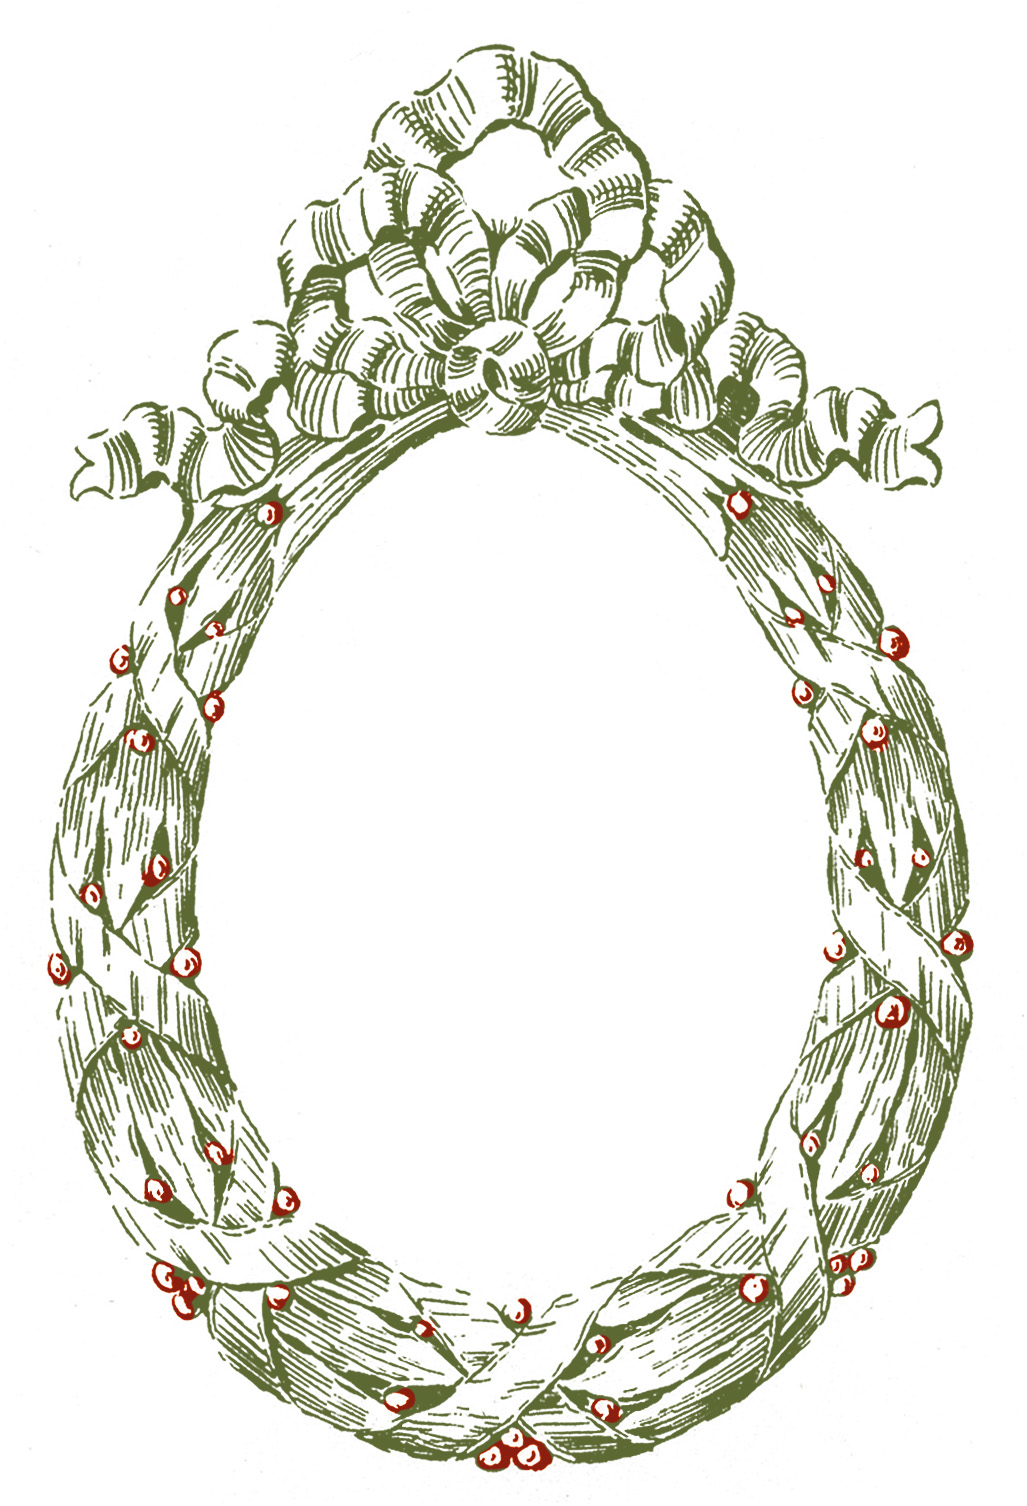 Vintage Graphic Frame   Oval Christmas Wreath   The Graphics Fairy